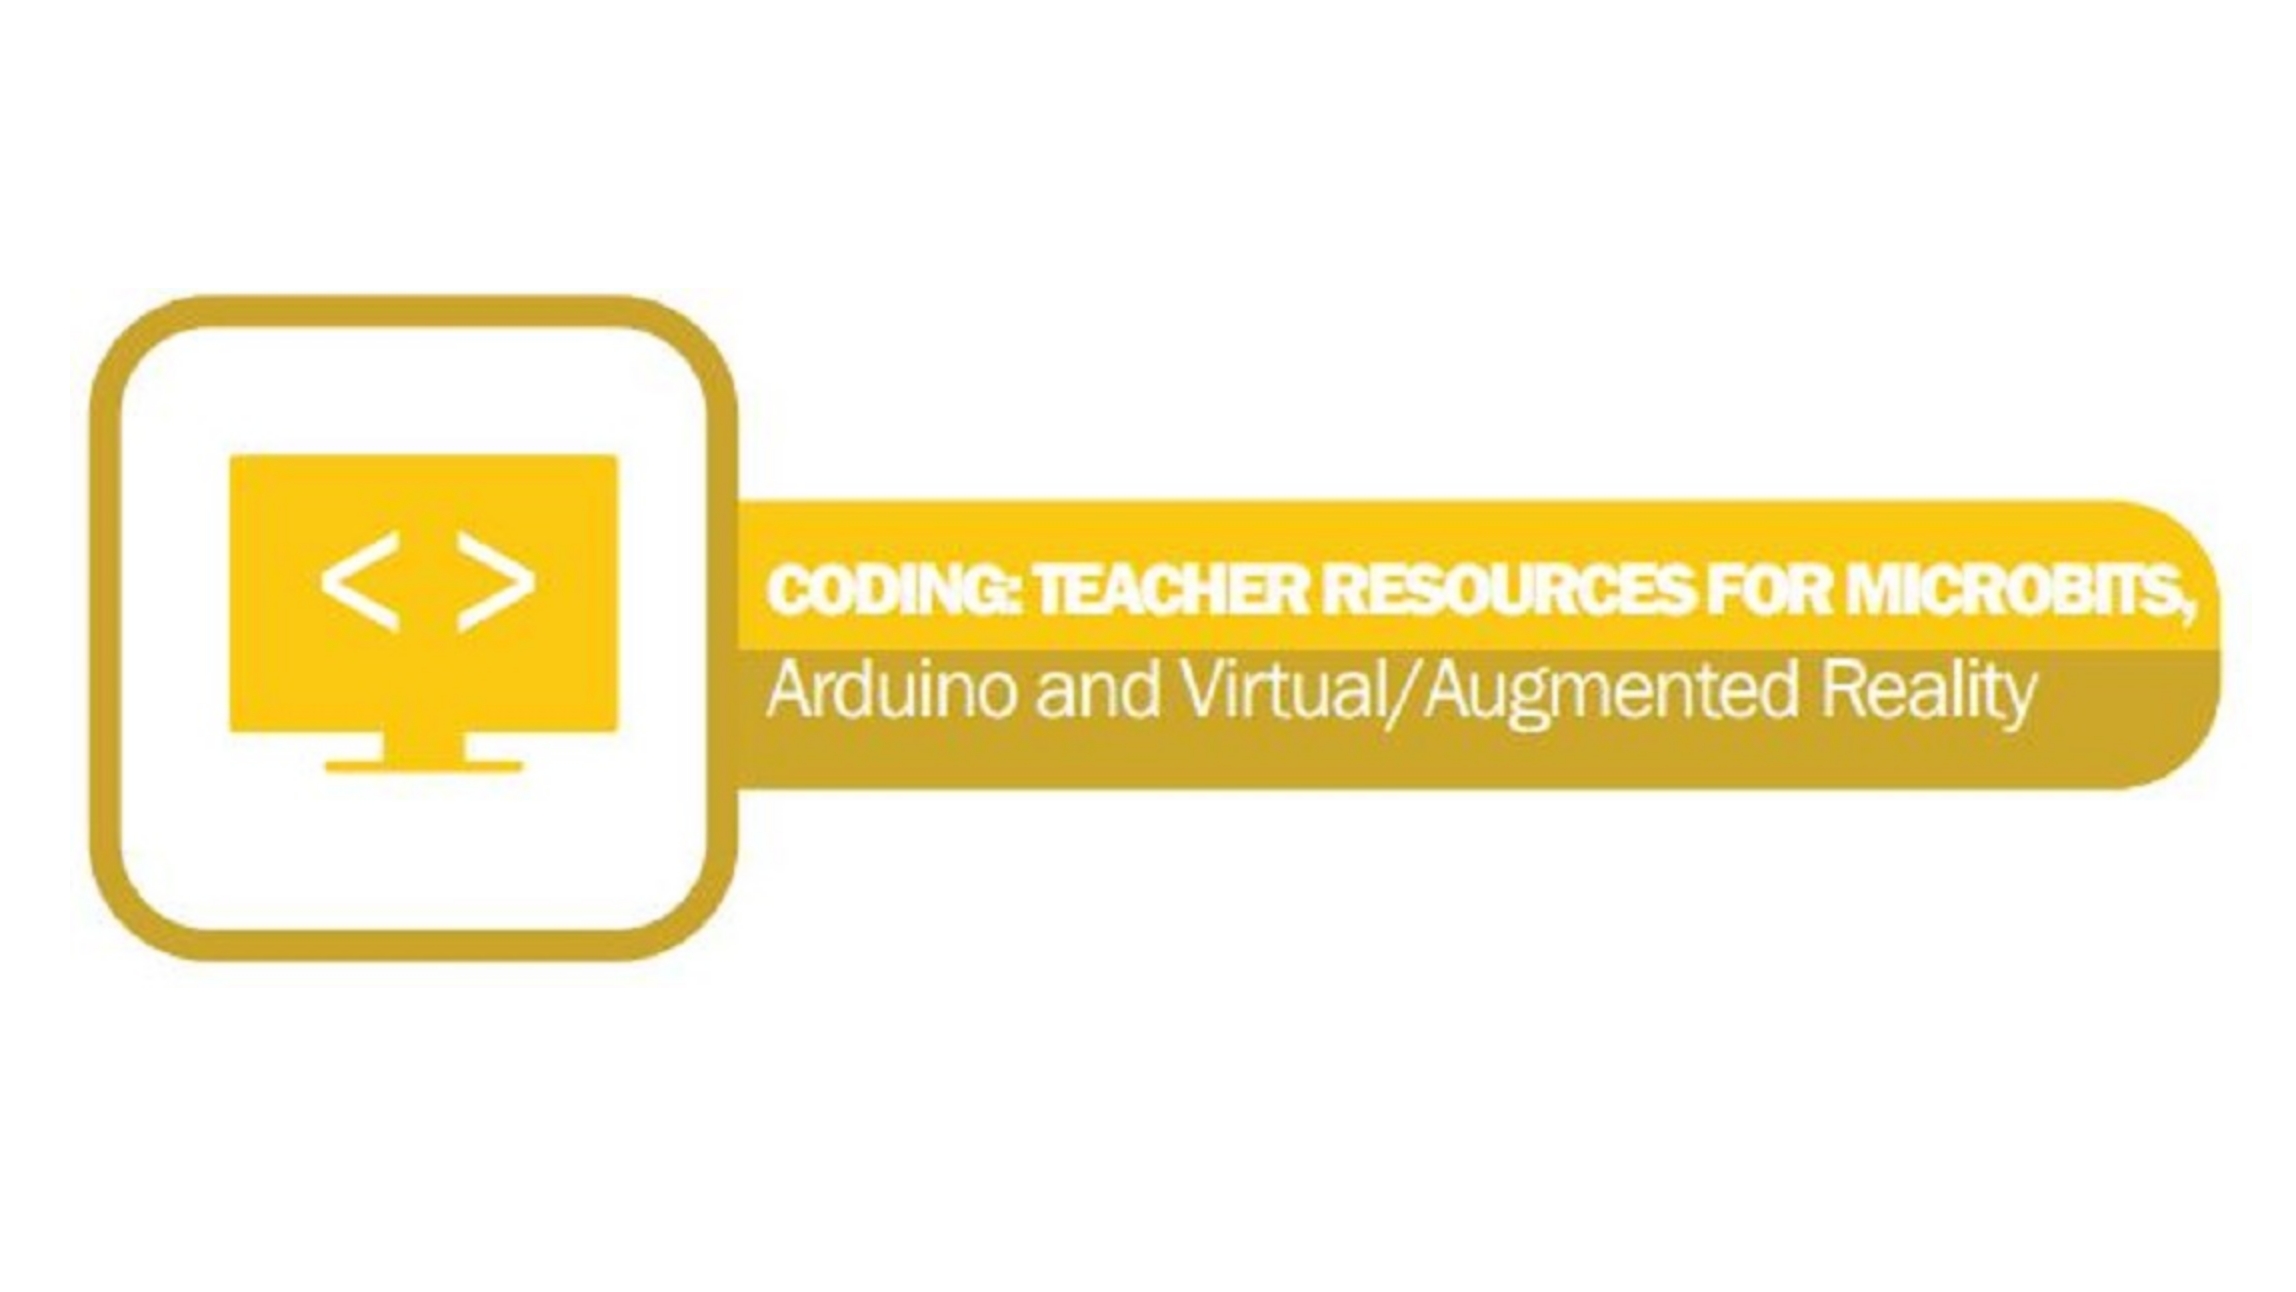 Coding: Teacher Resources for Microbits, Arduino and Virtual/Augmented Reality